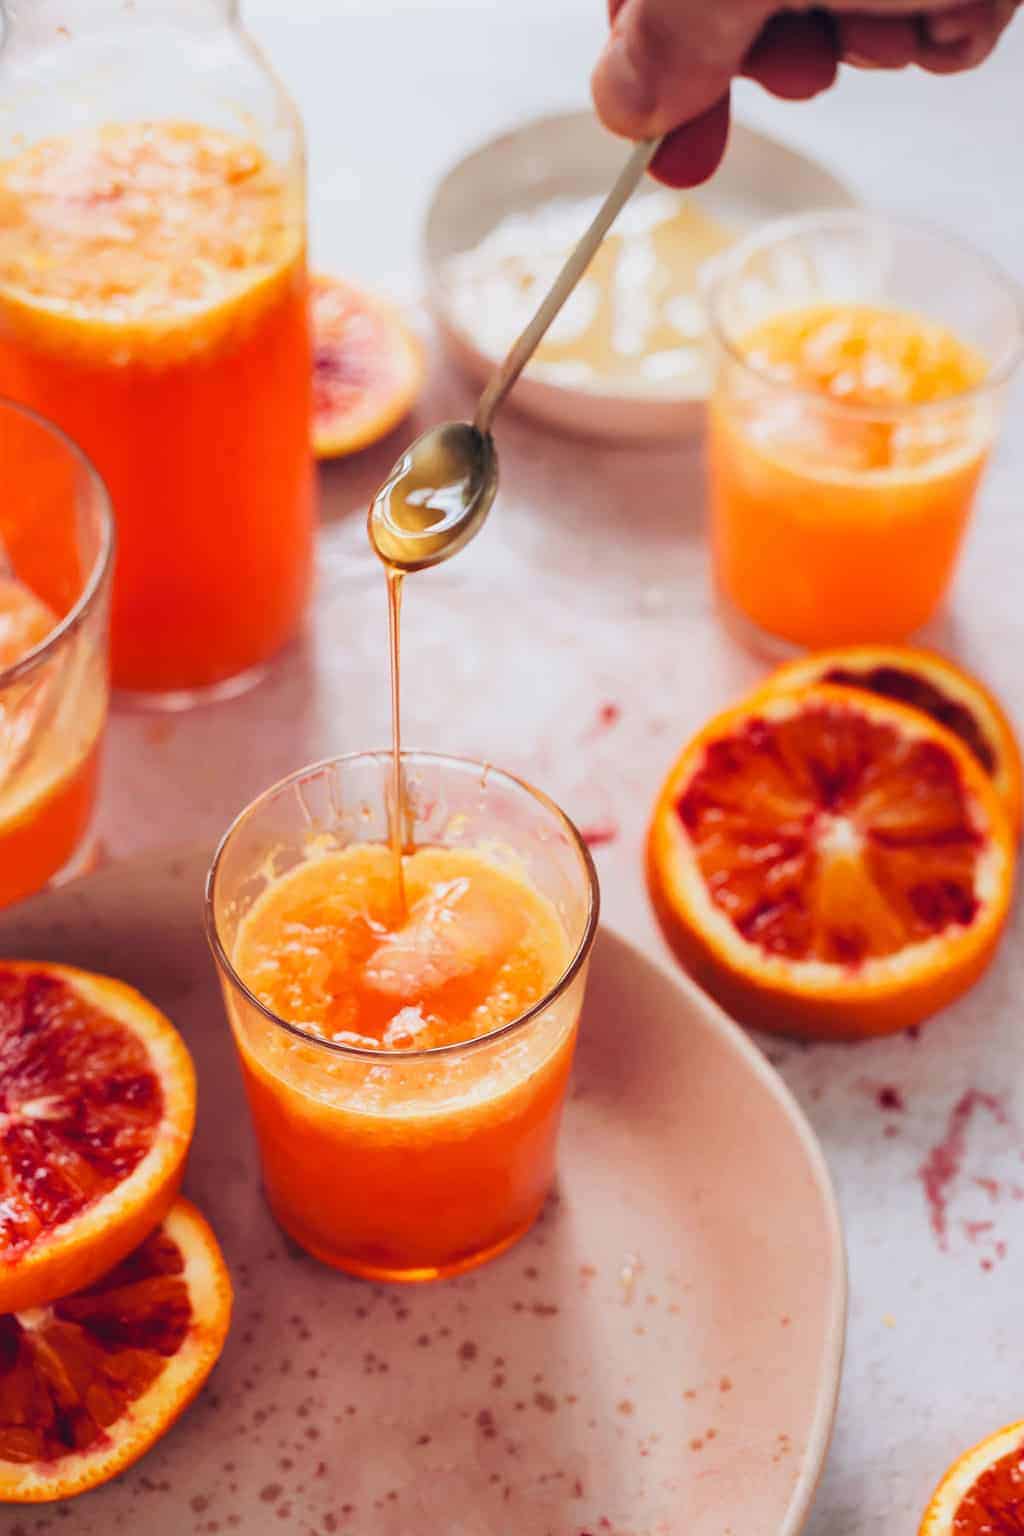 Blood orange sodas on a plate with honey going into the drink.